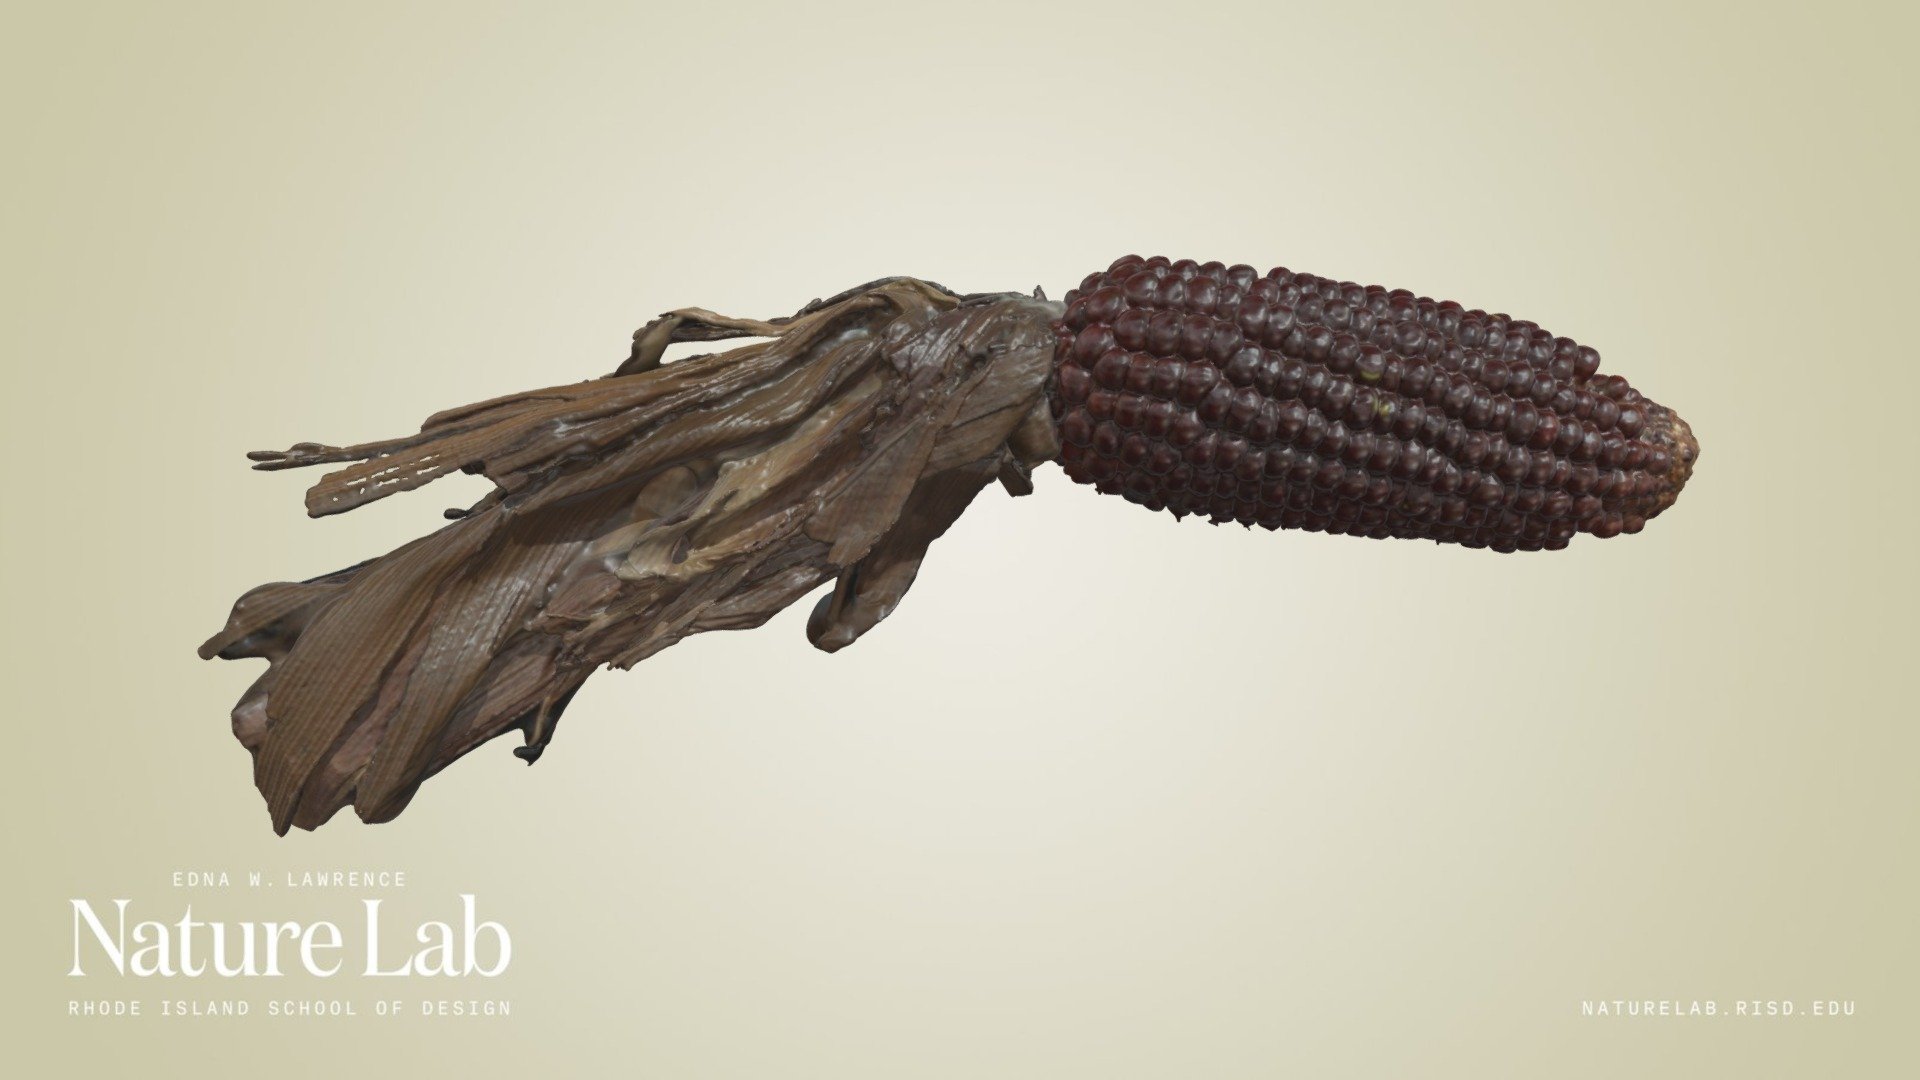 Zea mays

&ldquo;Maize is widely cultivated throughout the world, and a greater weight of maize is produced each year than any other grain. [&hellip;] The six major types of maize are dent corn, flint corn, pod corn, popcorn, flour corn, and sweet corn.